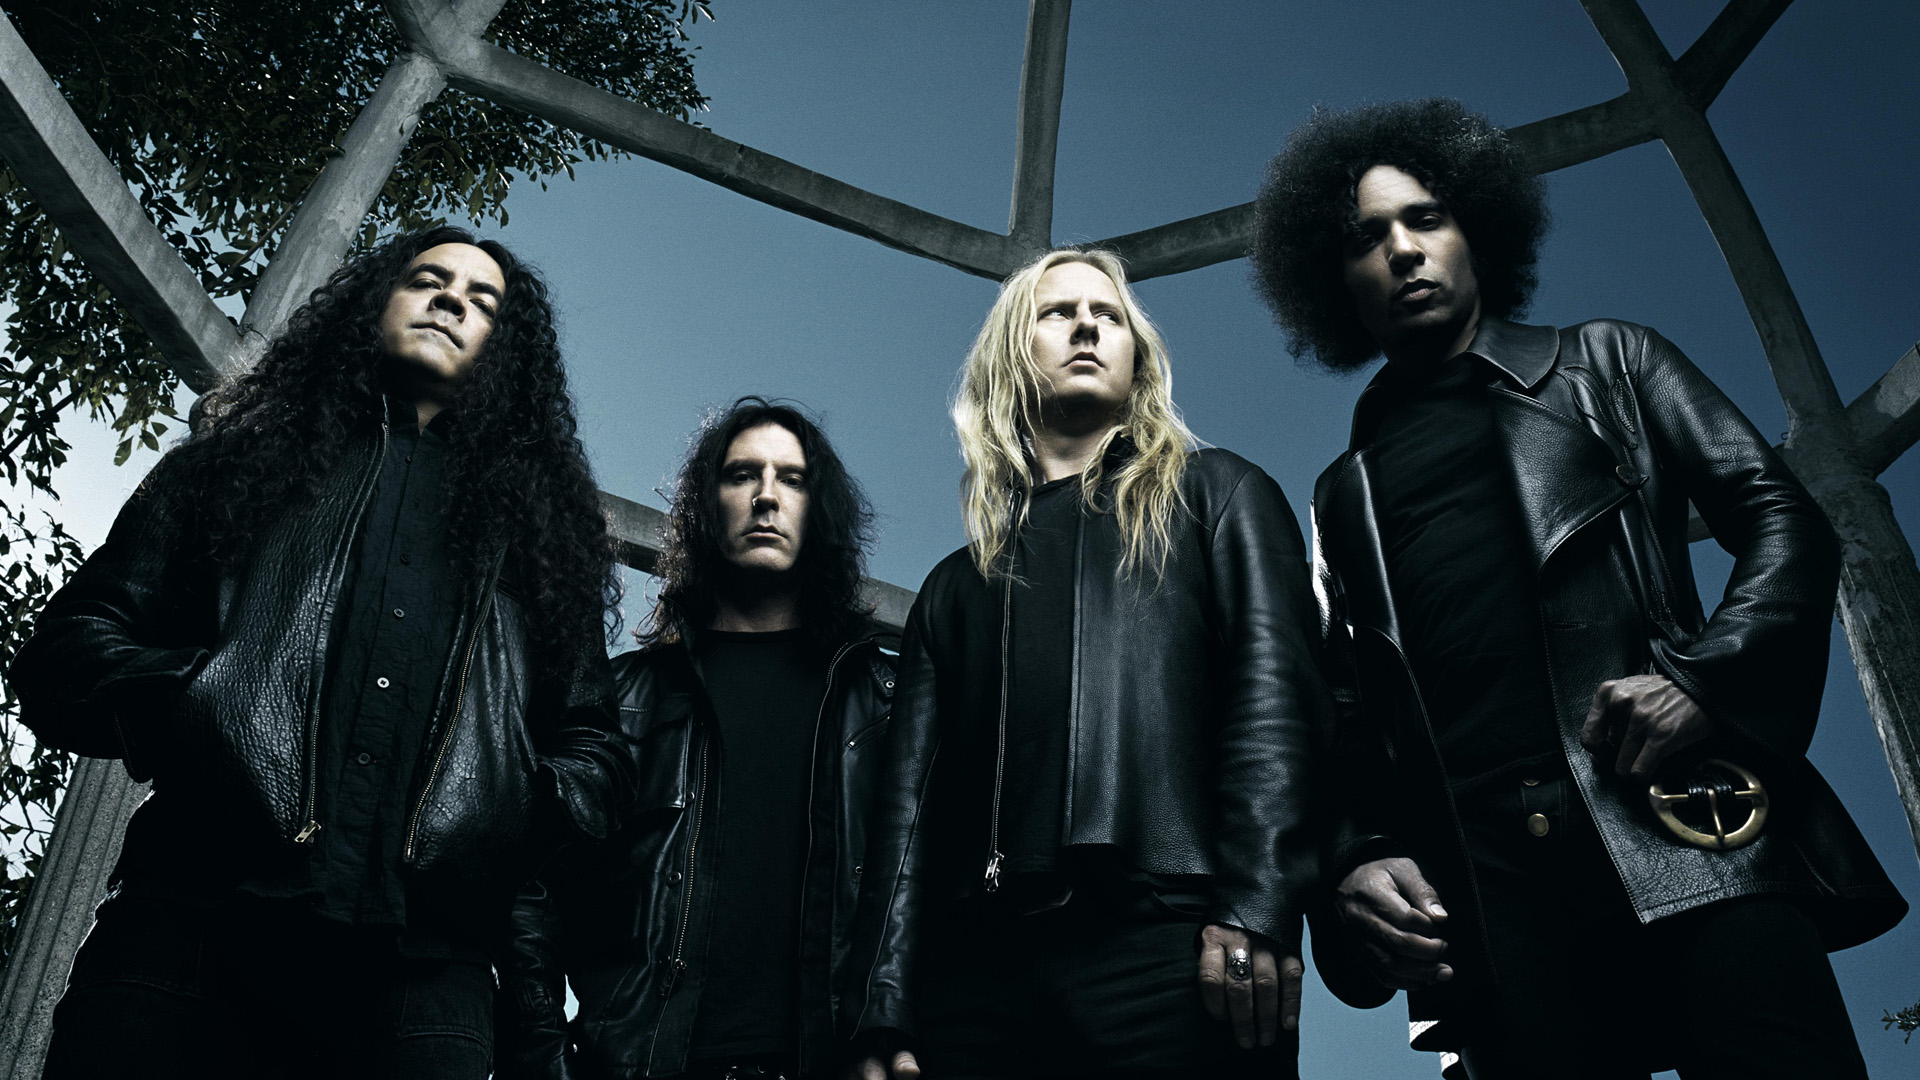 Alice In Chains Backgrounds, Compatible - PC, Mobile, Gadgets| 1920x1080 px